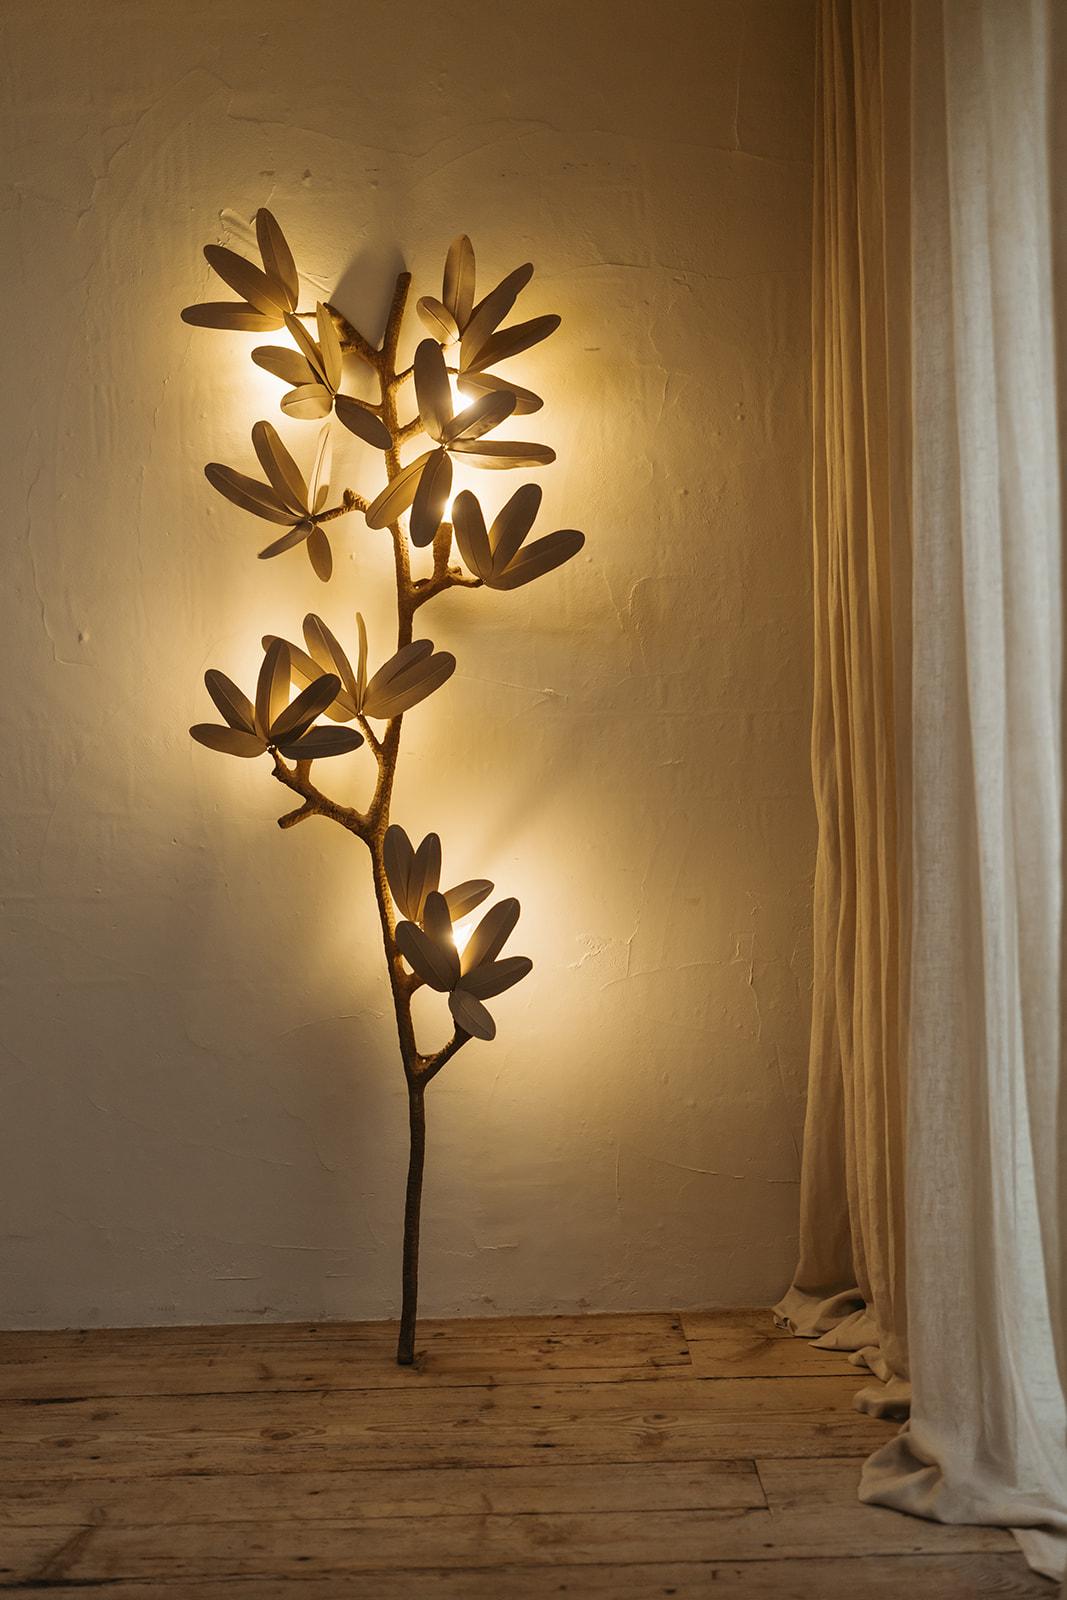 these wall lamps are a creation by French artist José Esteves, who's work is very poetic and always inspired by nature ... price is for the two lamps, shown on the pictures,
every piece José makes is unique, one is 198 cm high, the other one is 185